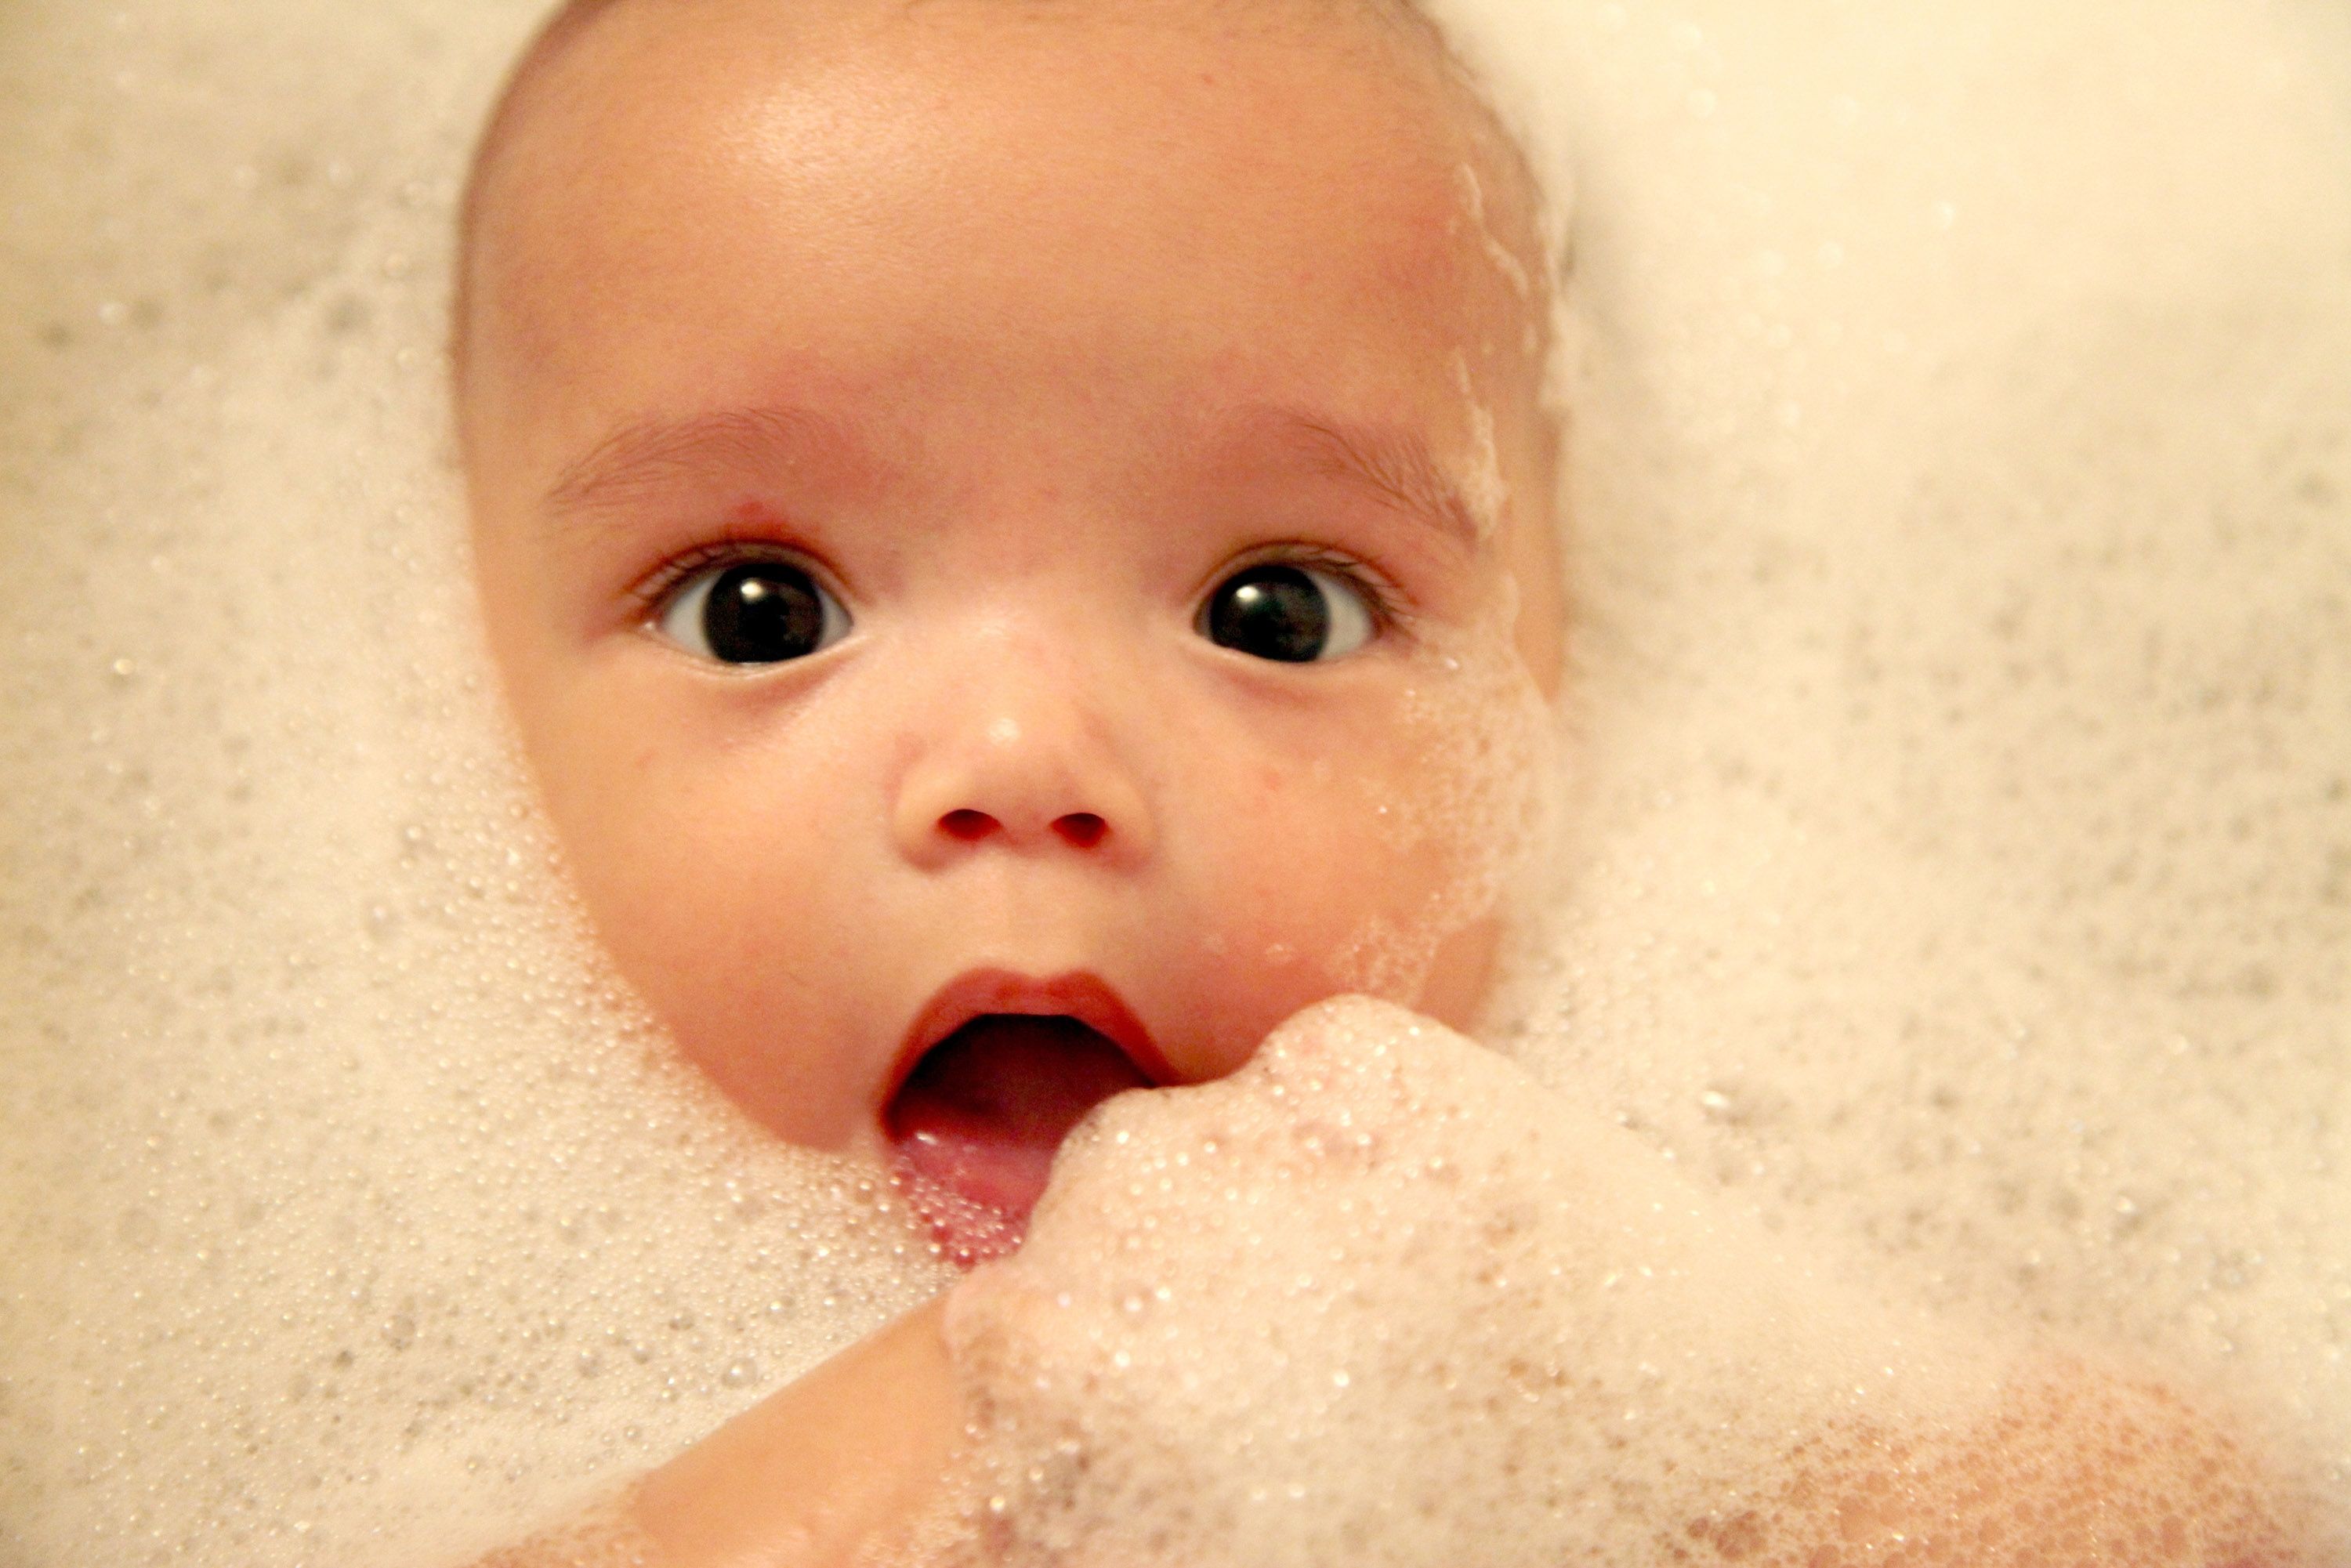 An infant in a bubble bath | Source: Getty Images